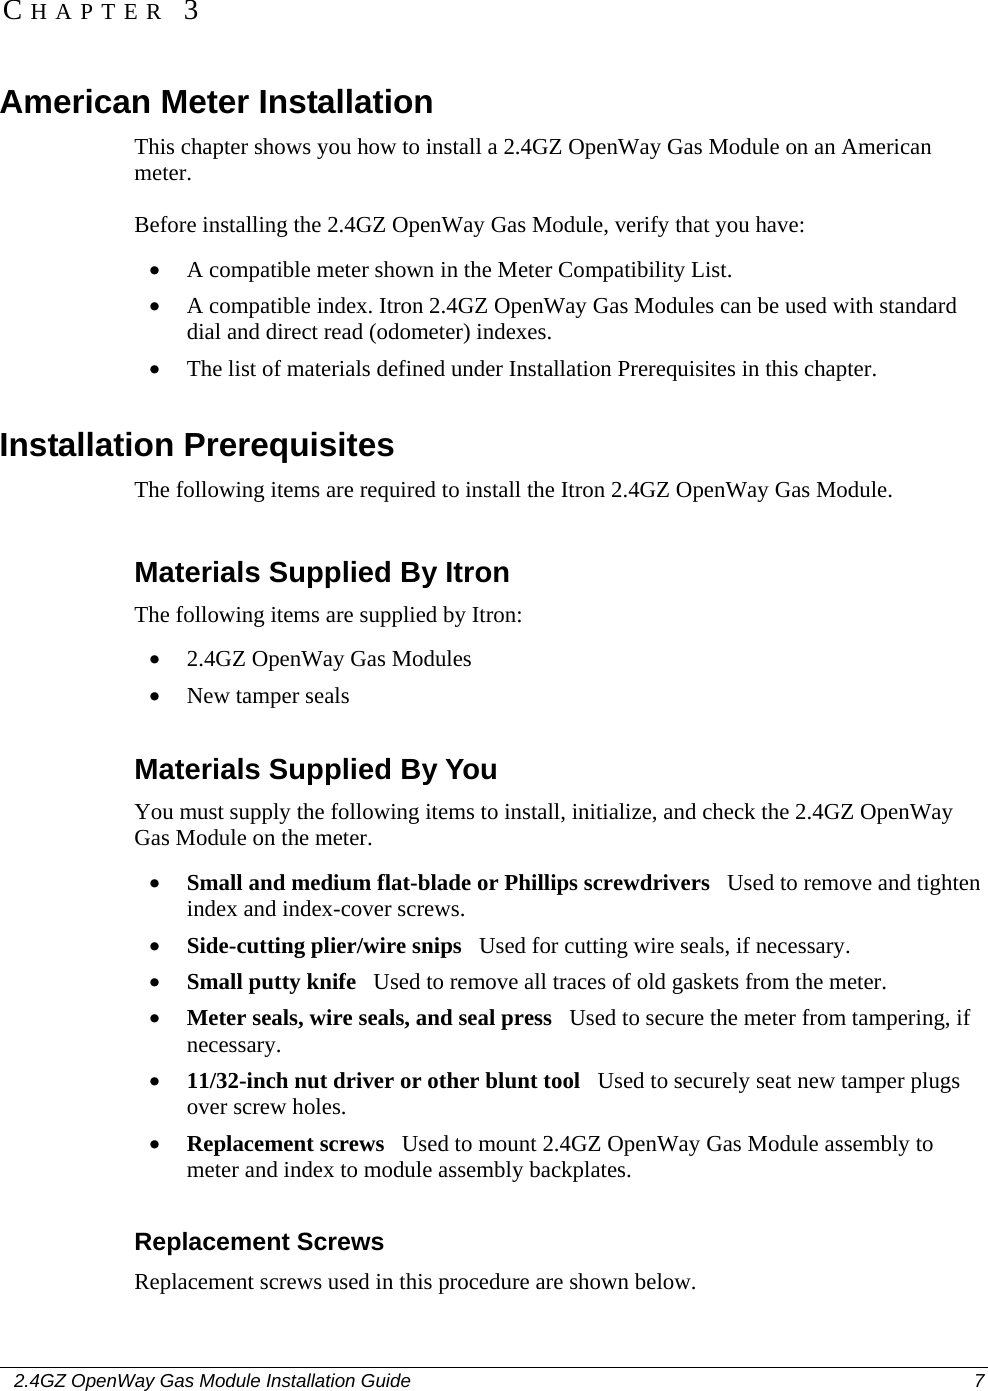    2.4GZ OpenWay Gas Module Installation Guide  7  American Meter Installation This chapter shows you how to install a 2.4GZ OpenWay Gas Module on an American meter. Before installing the 2.4GZ OpenWay Gas Module, verify that you have: • A compatible meter shown in the Meter Compatibility List. • A compatible index. Itron 2.4GZ OpenWay Gas Modules can be used with standard dial and direct read (odometer) indexes. • The list of materials defined under Installation Prerequisites in this chapter.  Installation Prerequisites The following items are required to install the Itron 2.4GZ OpenWay Gas Module.  Materials Supplied By Itron The following items are supplied by Itron: • 2.4GZ OpenWay Gas Modules • New tamper seals  Materials Supplied By You You must supply the following items to install, initialize, and check the 2.4GZ OpenWay Gas Module on the meter. • Small and medium flat-blade or Phillips screwdrivers   Used to remove and tighten index and index-cover screws. • Side-cutting plier/wire snips   Used for cutting wire seals, if necessary. • Small putty knife   Used to remove all traces of old gaskets from the meter.  • Meter seals, wire seals, and seal press   Used to secure the meter from tampering, if necessary. • 11/32-inch nut driver or other blunt tool   Used to securely seat new tamper plugs over screw holes.  • Replacement screws   Used to mount 2.4GZ OpenWay Gas Module assembly to meter and index to module assembly backplates.  Replacement Screws Replacement screws used in this procedure are shown below. CHAPTER 3 